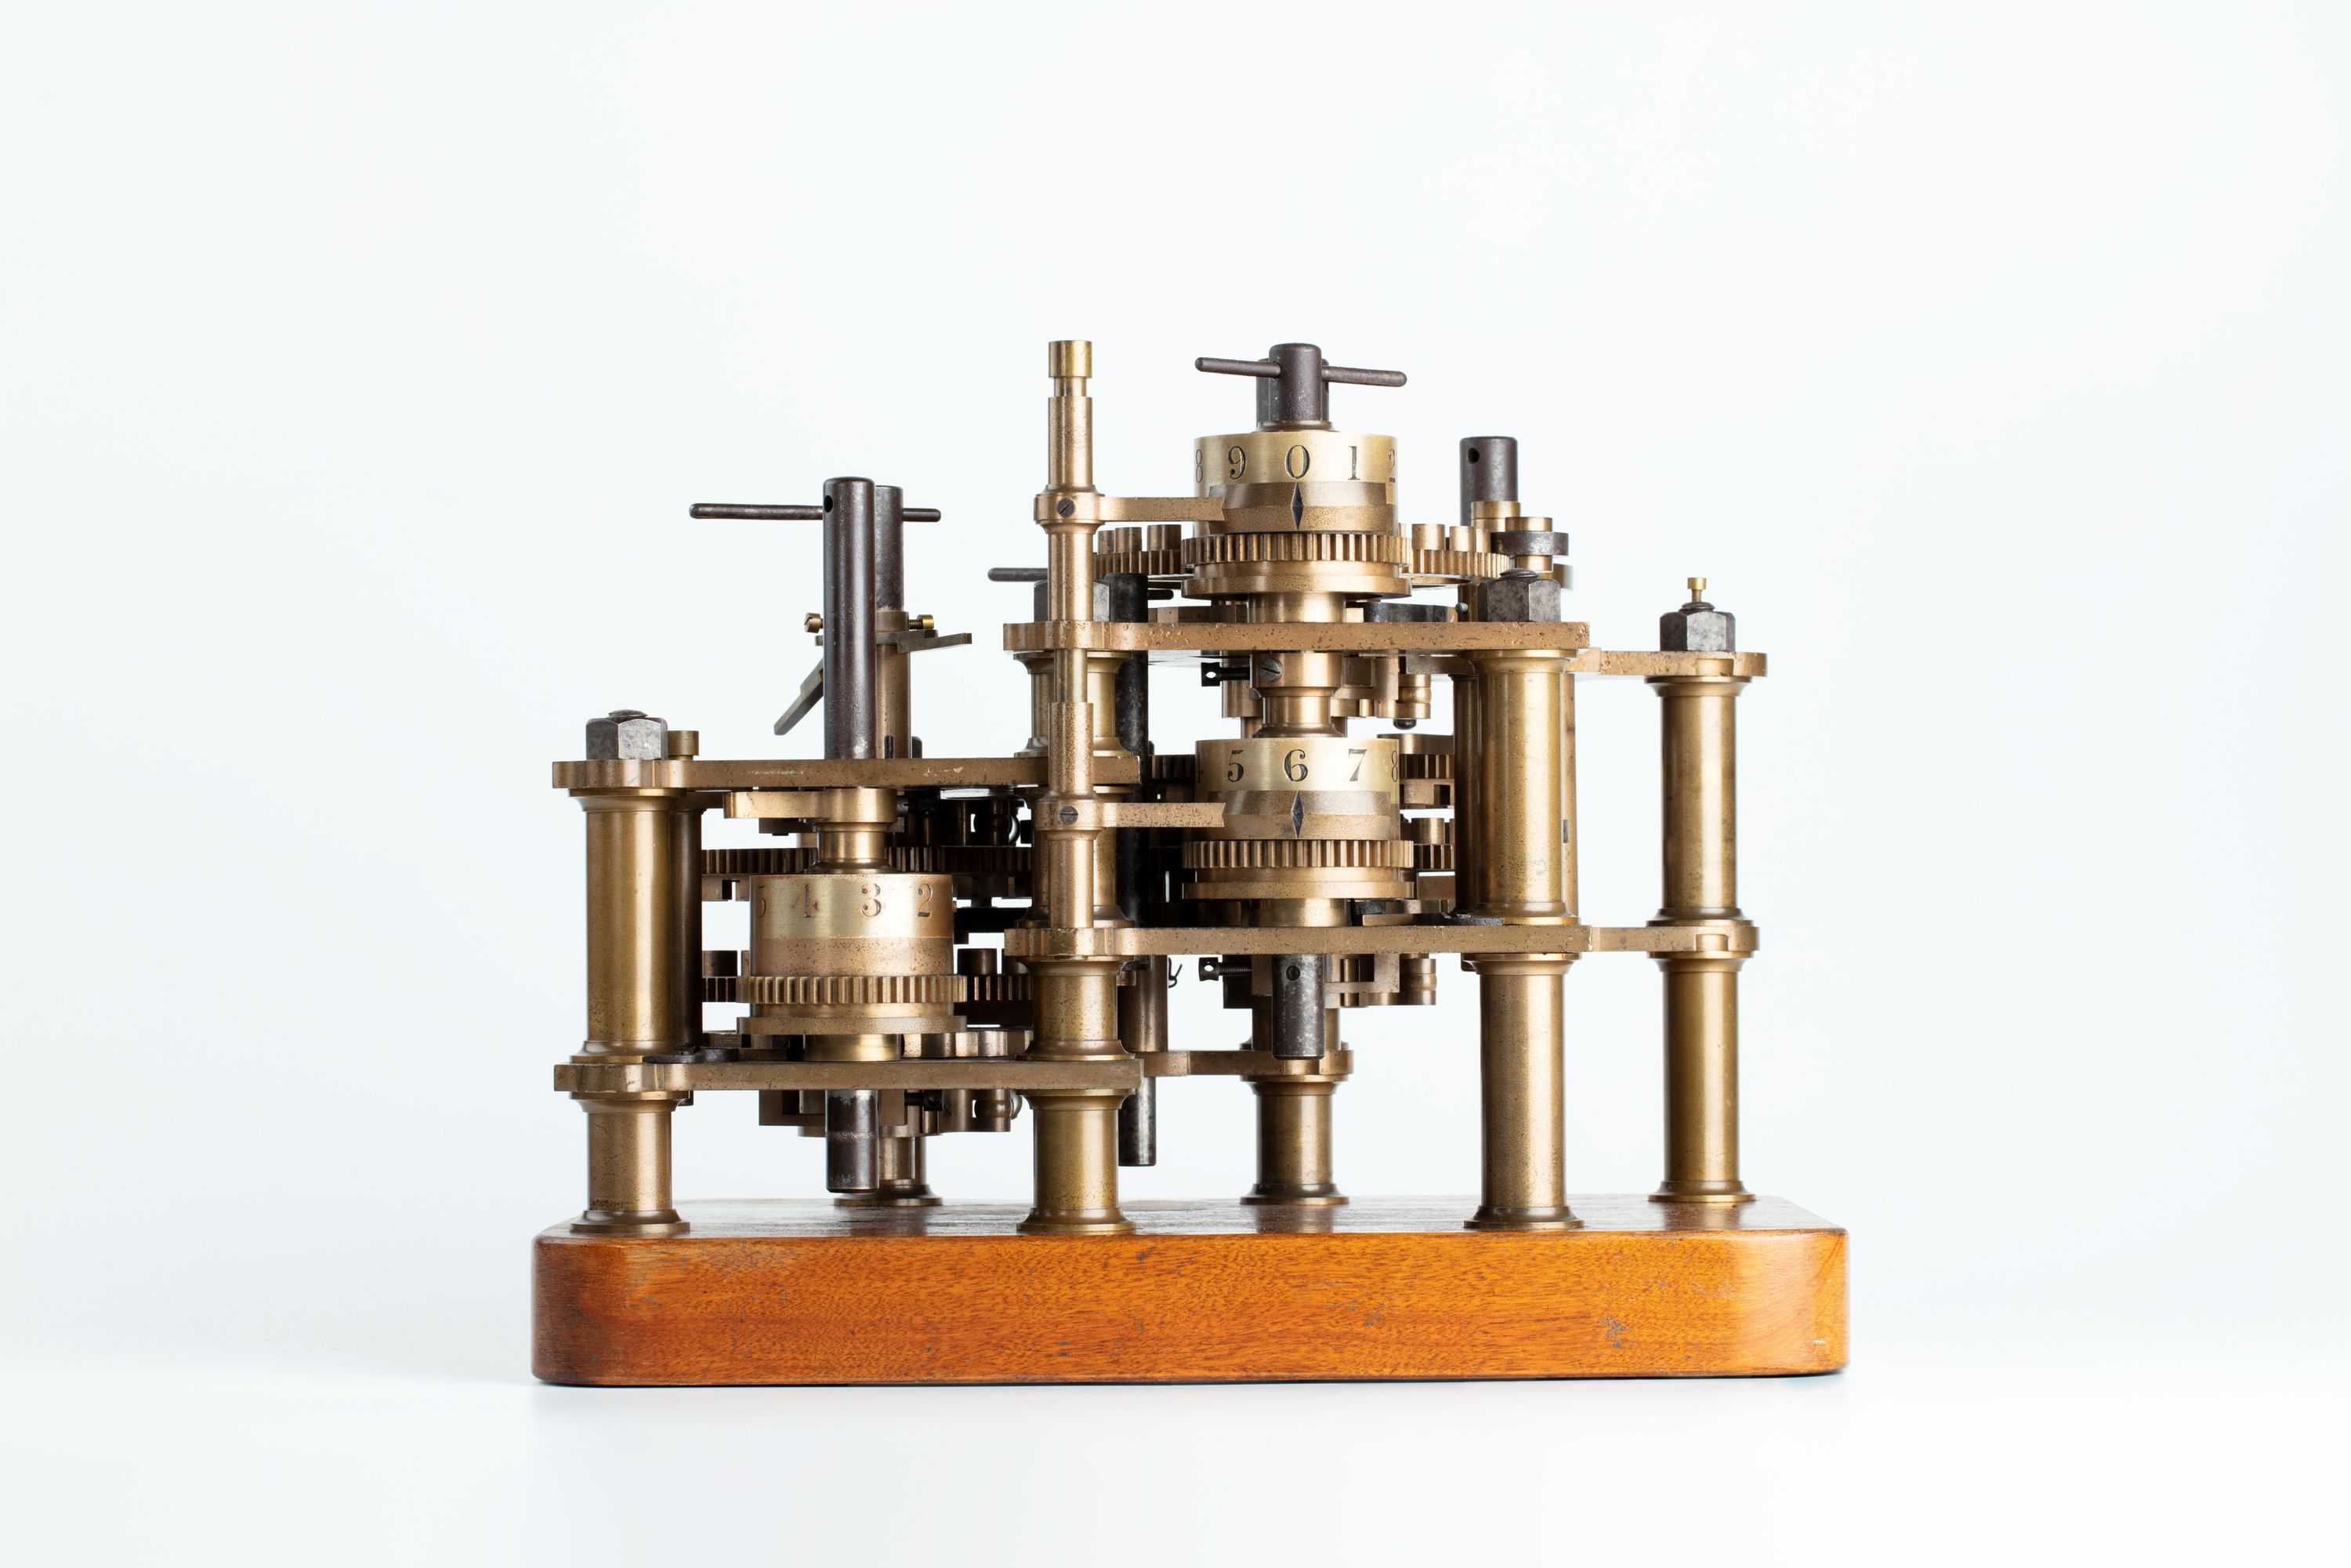 Babbage “Difference Engine No 1” calculating engine